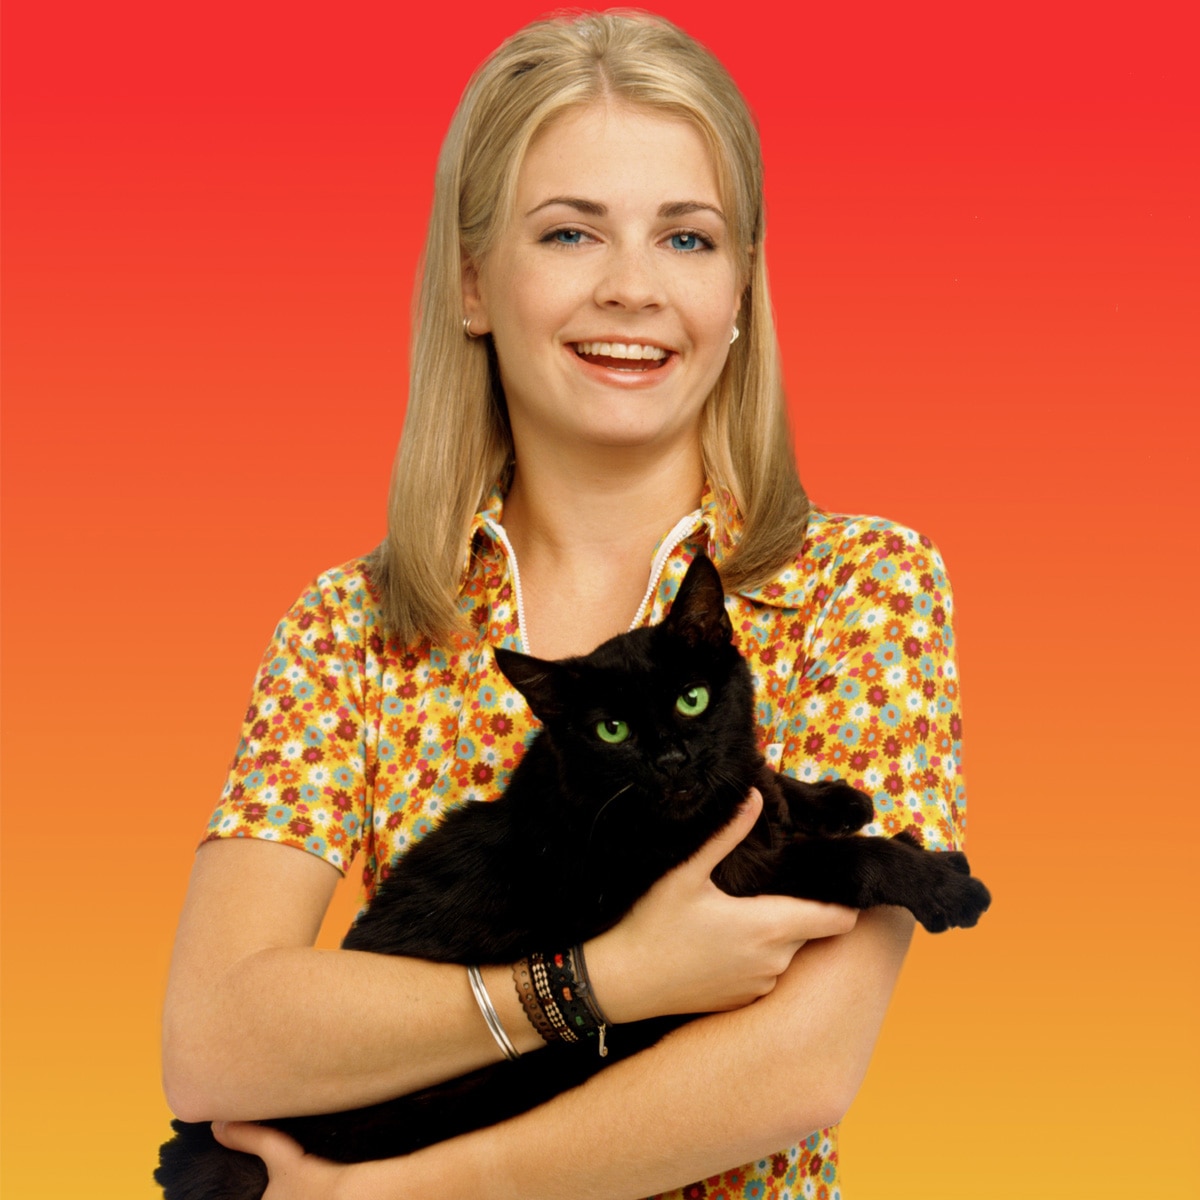 Sabrina the Teenage Witch by Kelly Thompson